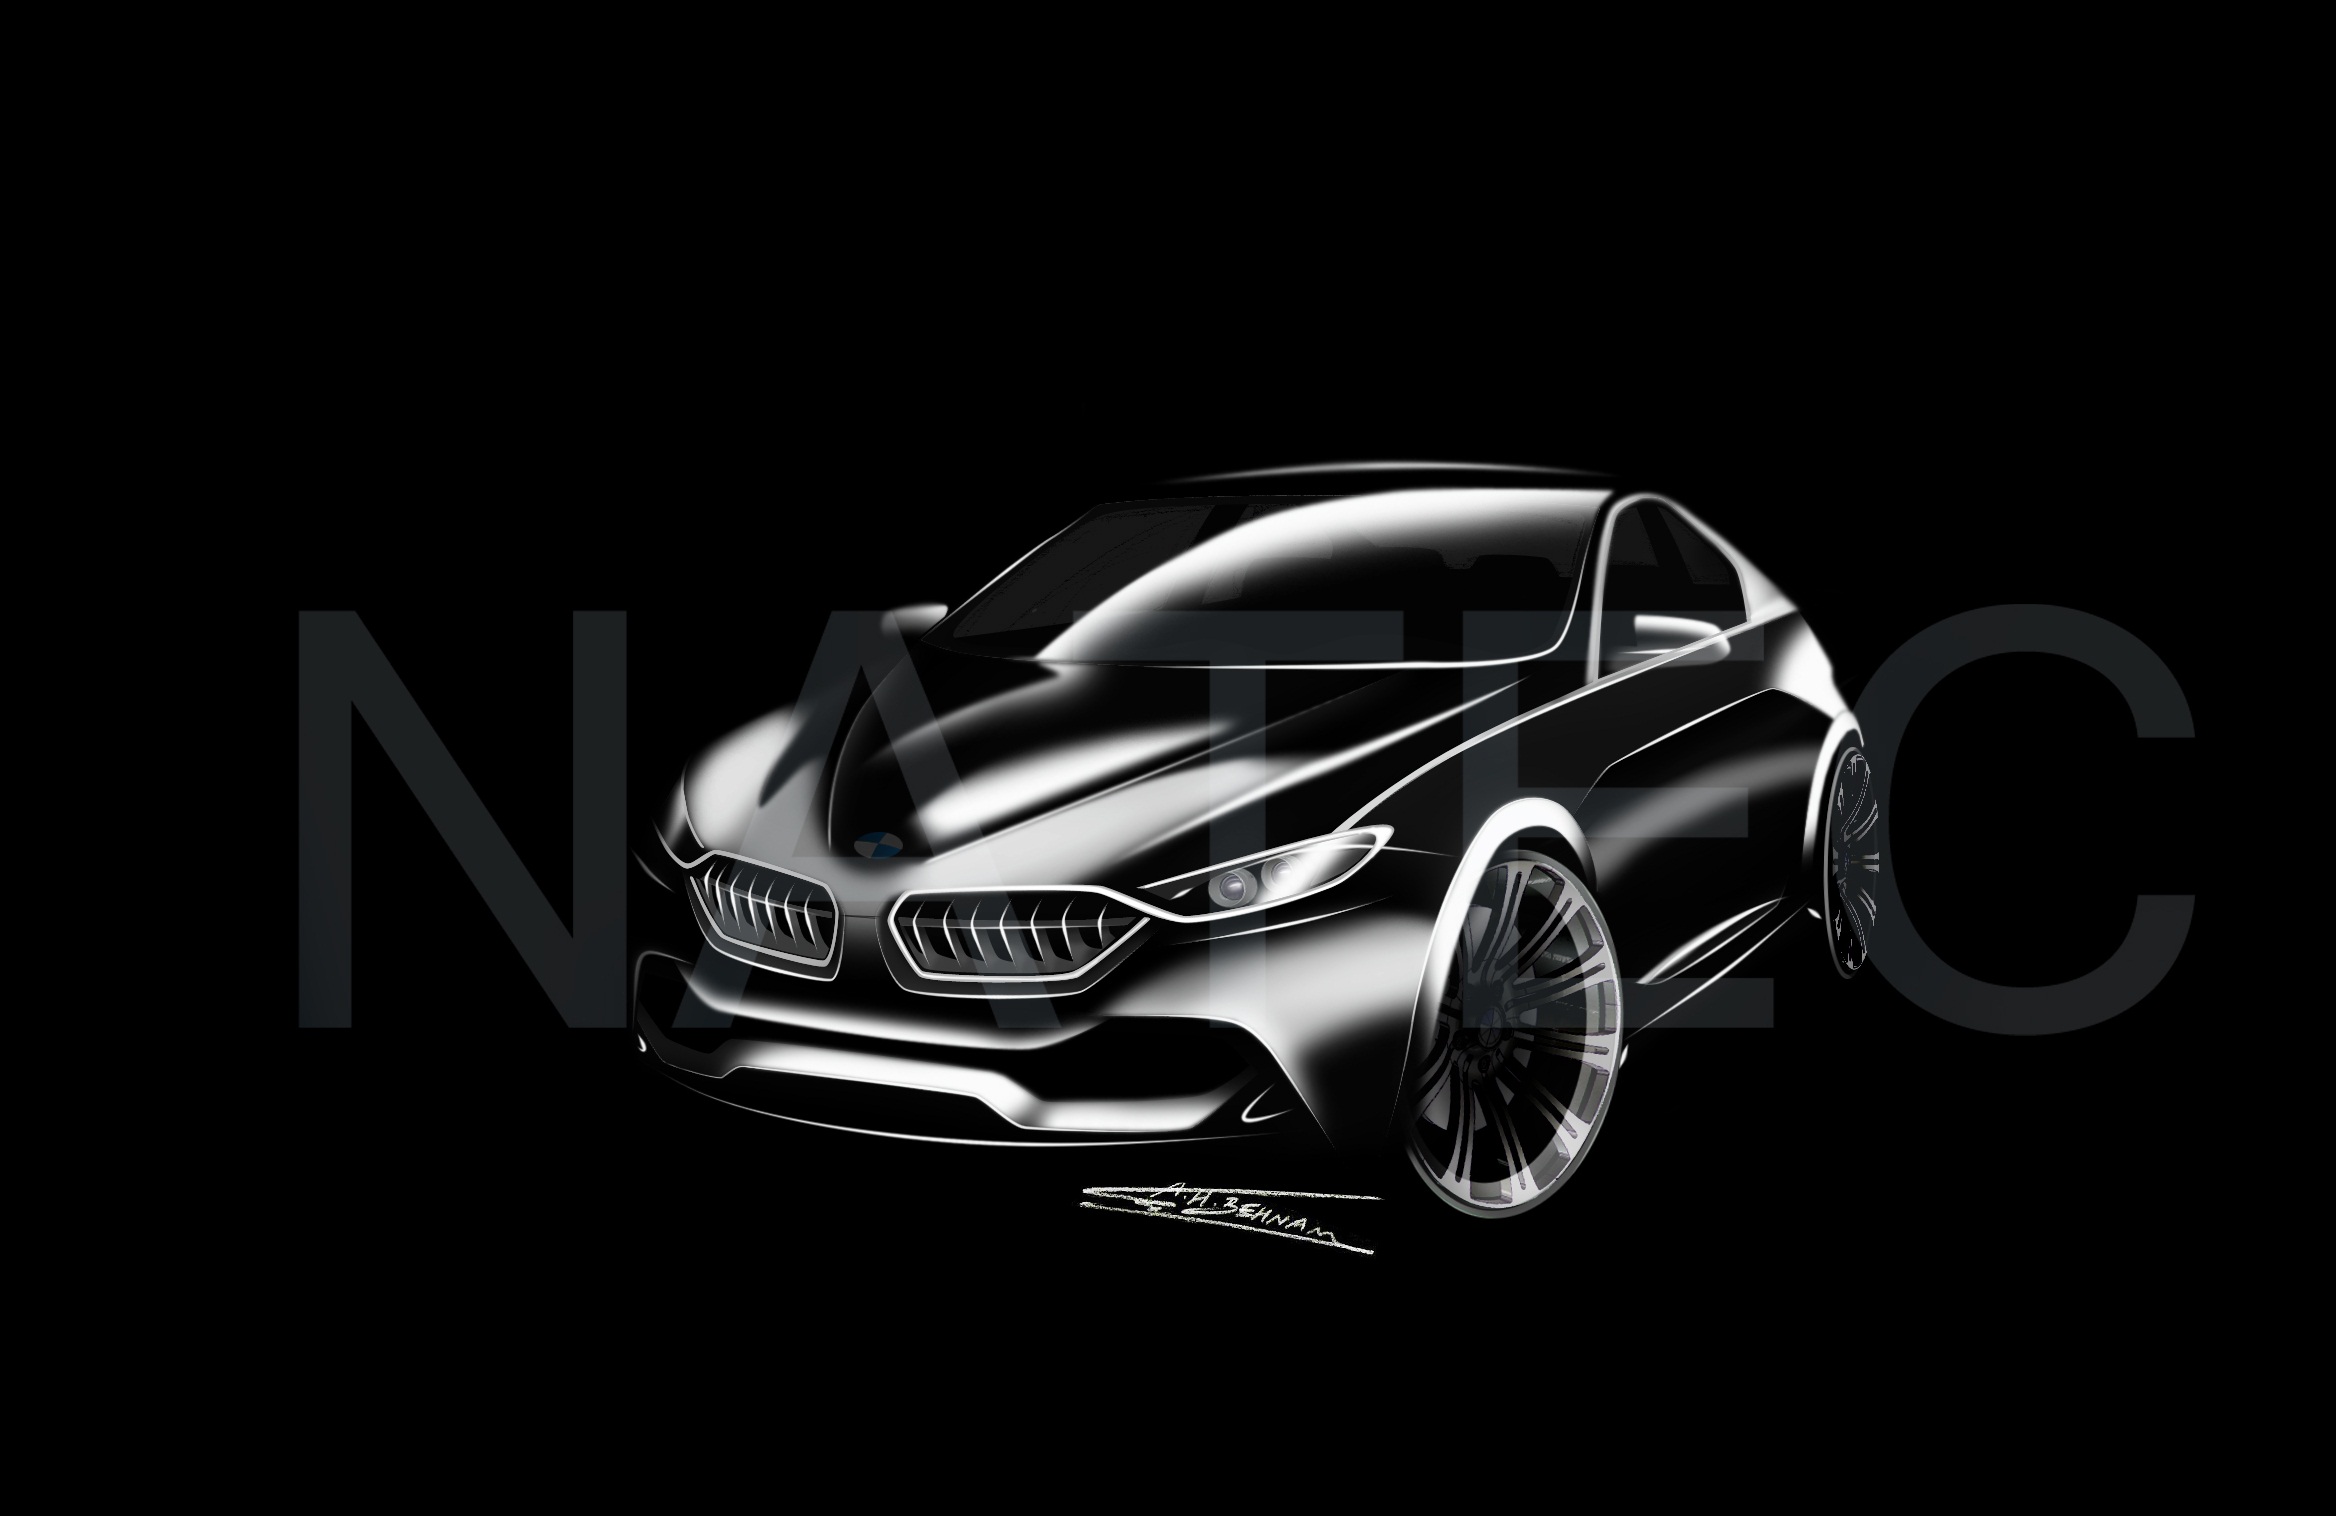 BMW 3-SERIES CONCEPT FRONT VIEW